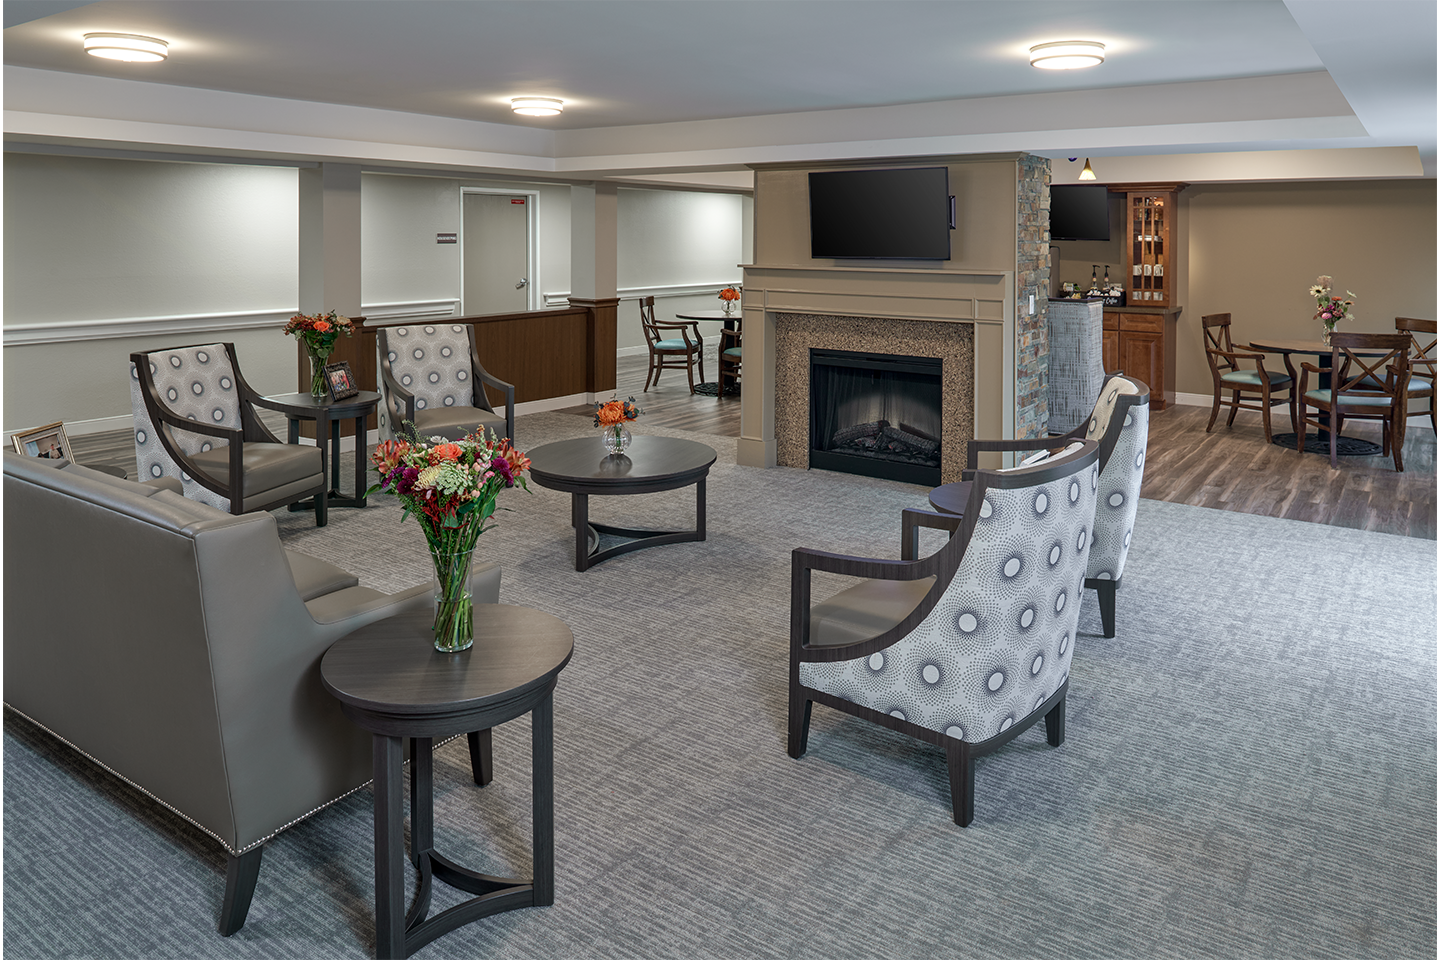 Common area of American House Grand Blanc, a senior living community in Genesee County, Michigan.